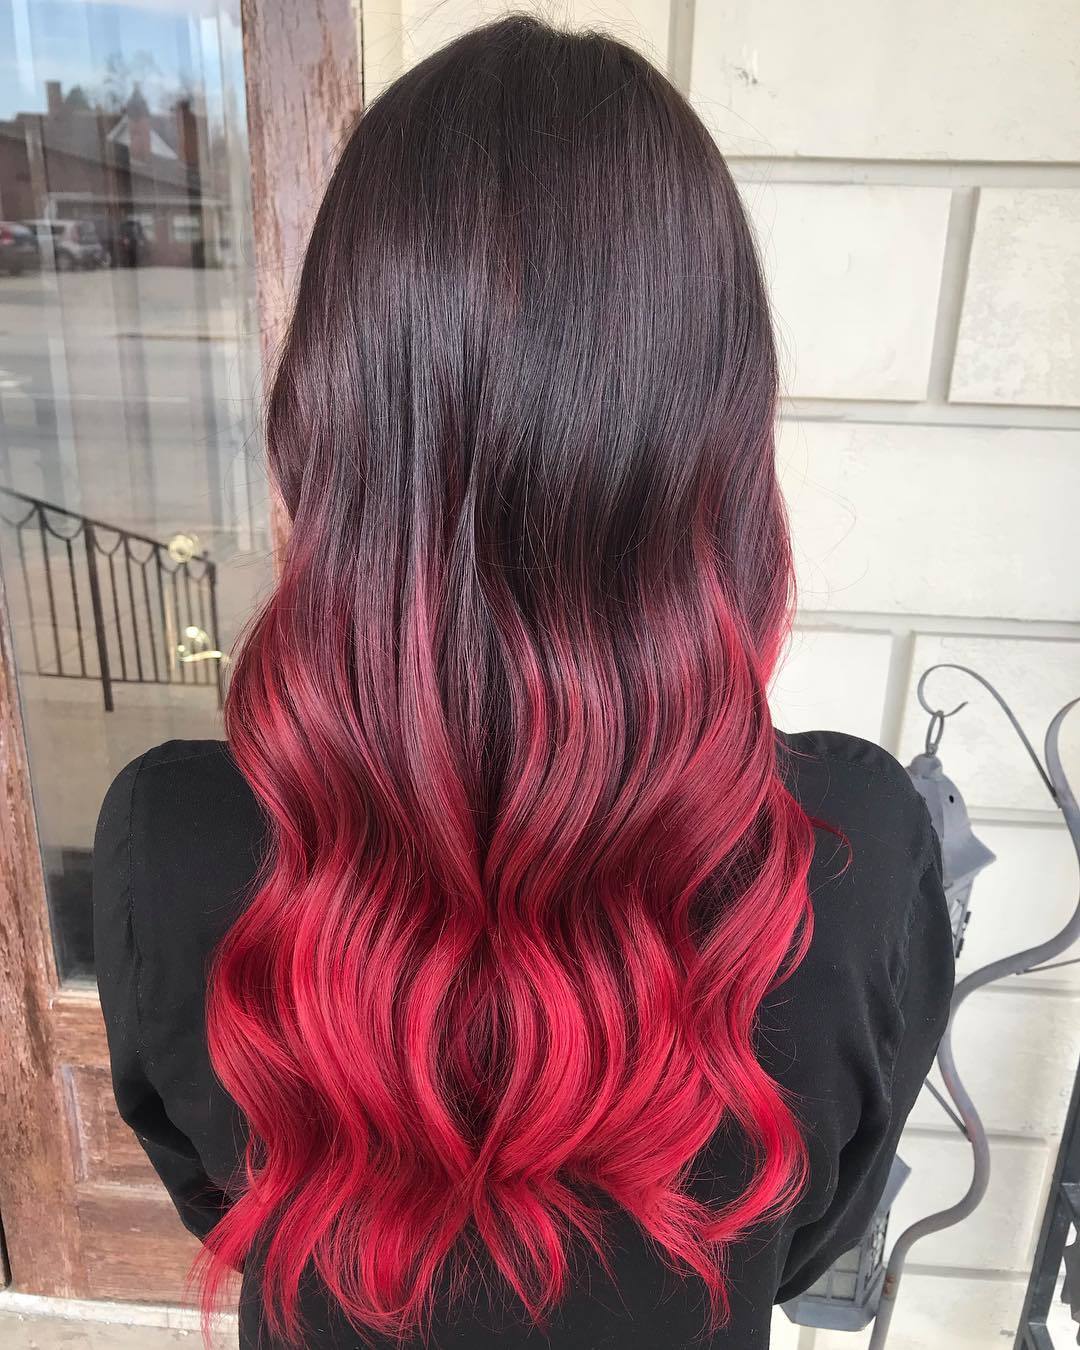 Popular Black And Red Hairs.